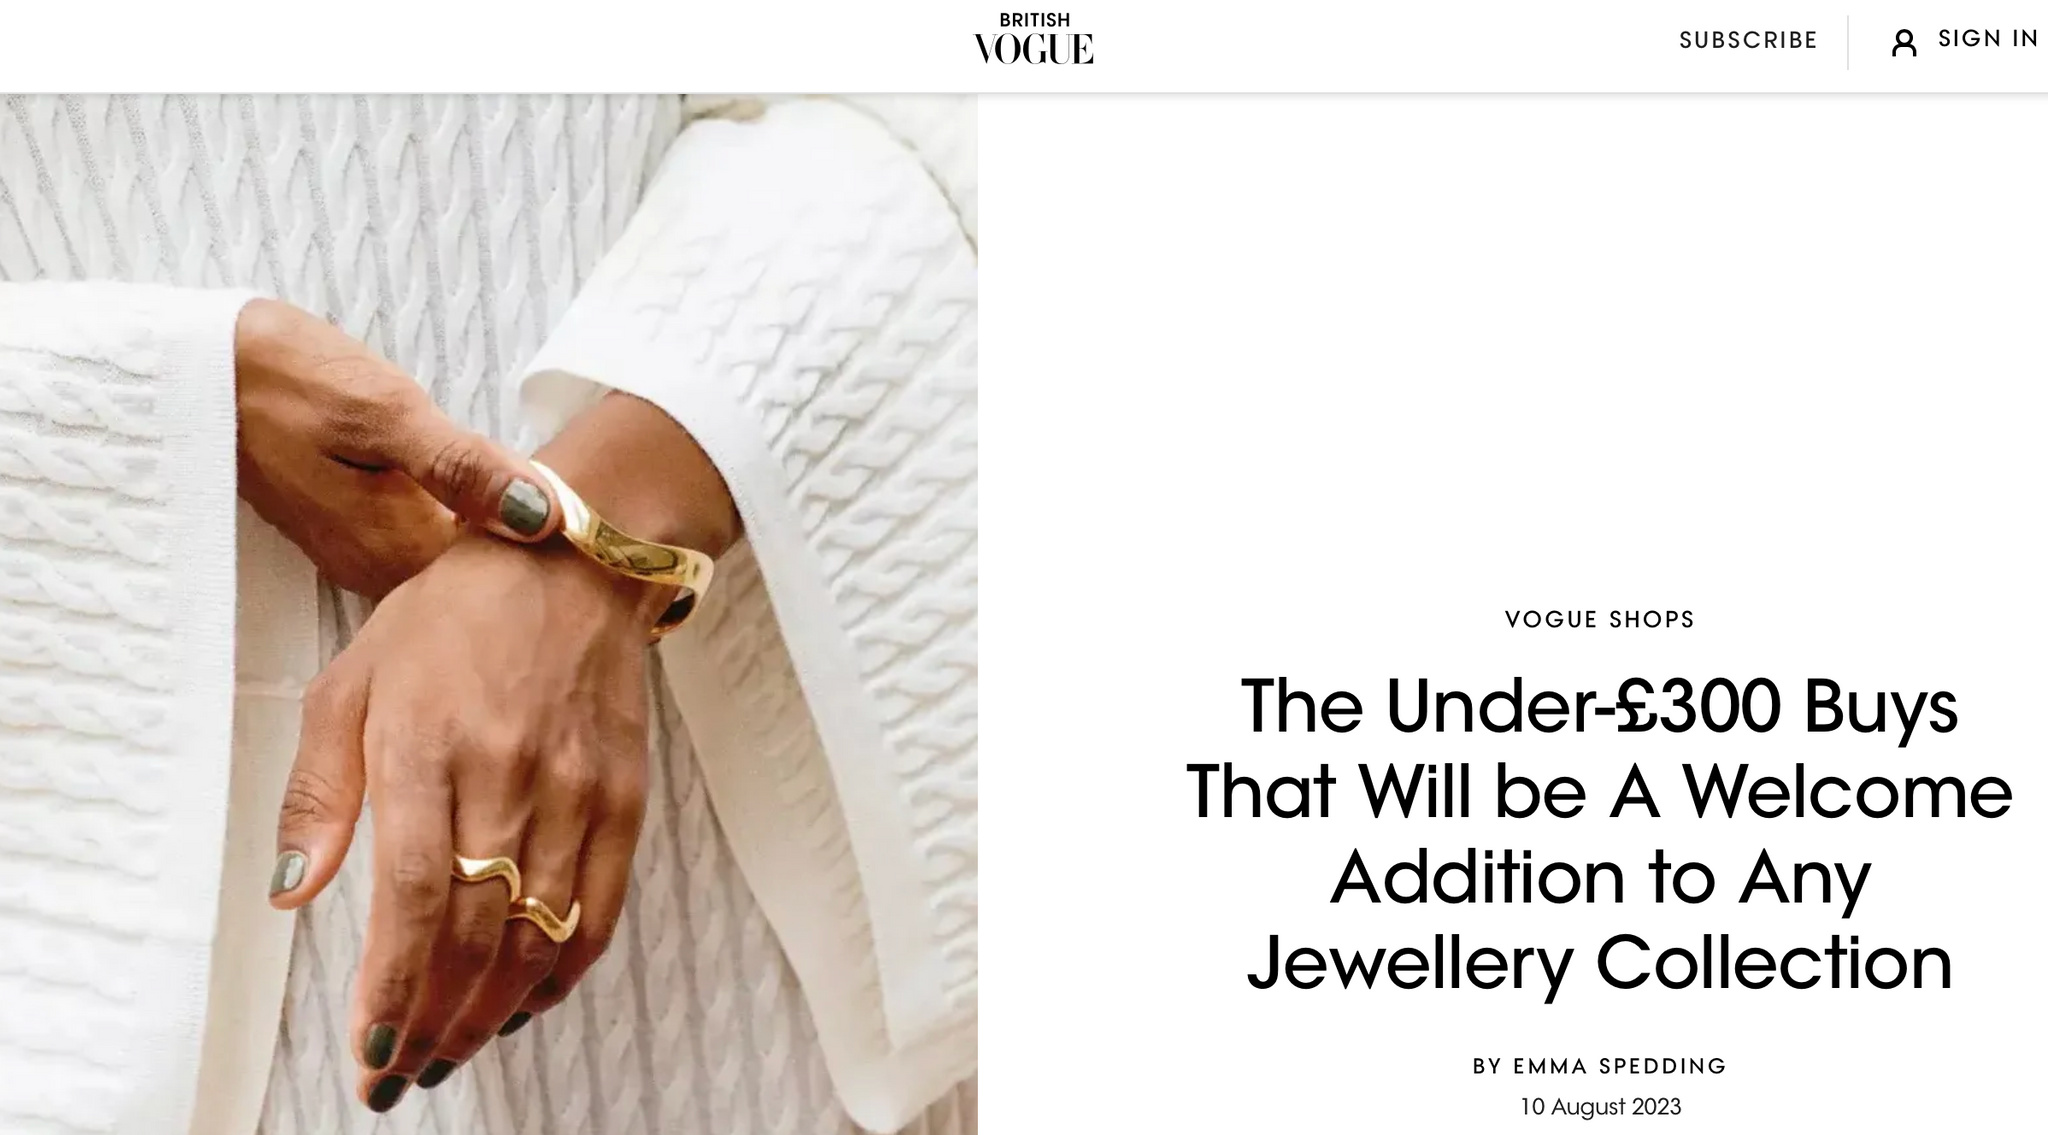 BRITISH VOGUE: The Under-£300 Buys That Will be A Welcome Addition to Any Jewellery Collection